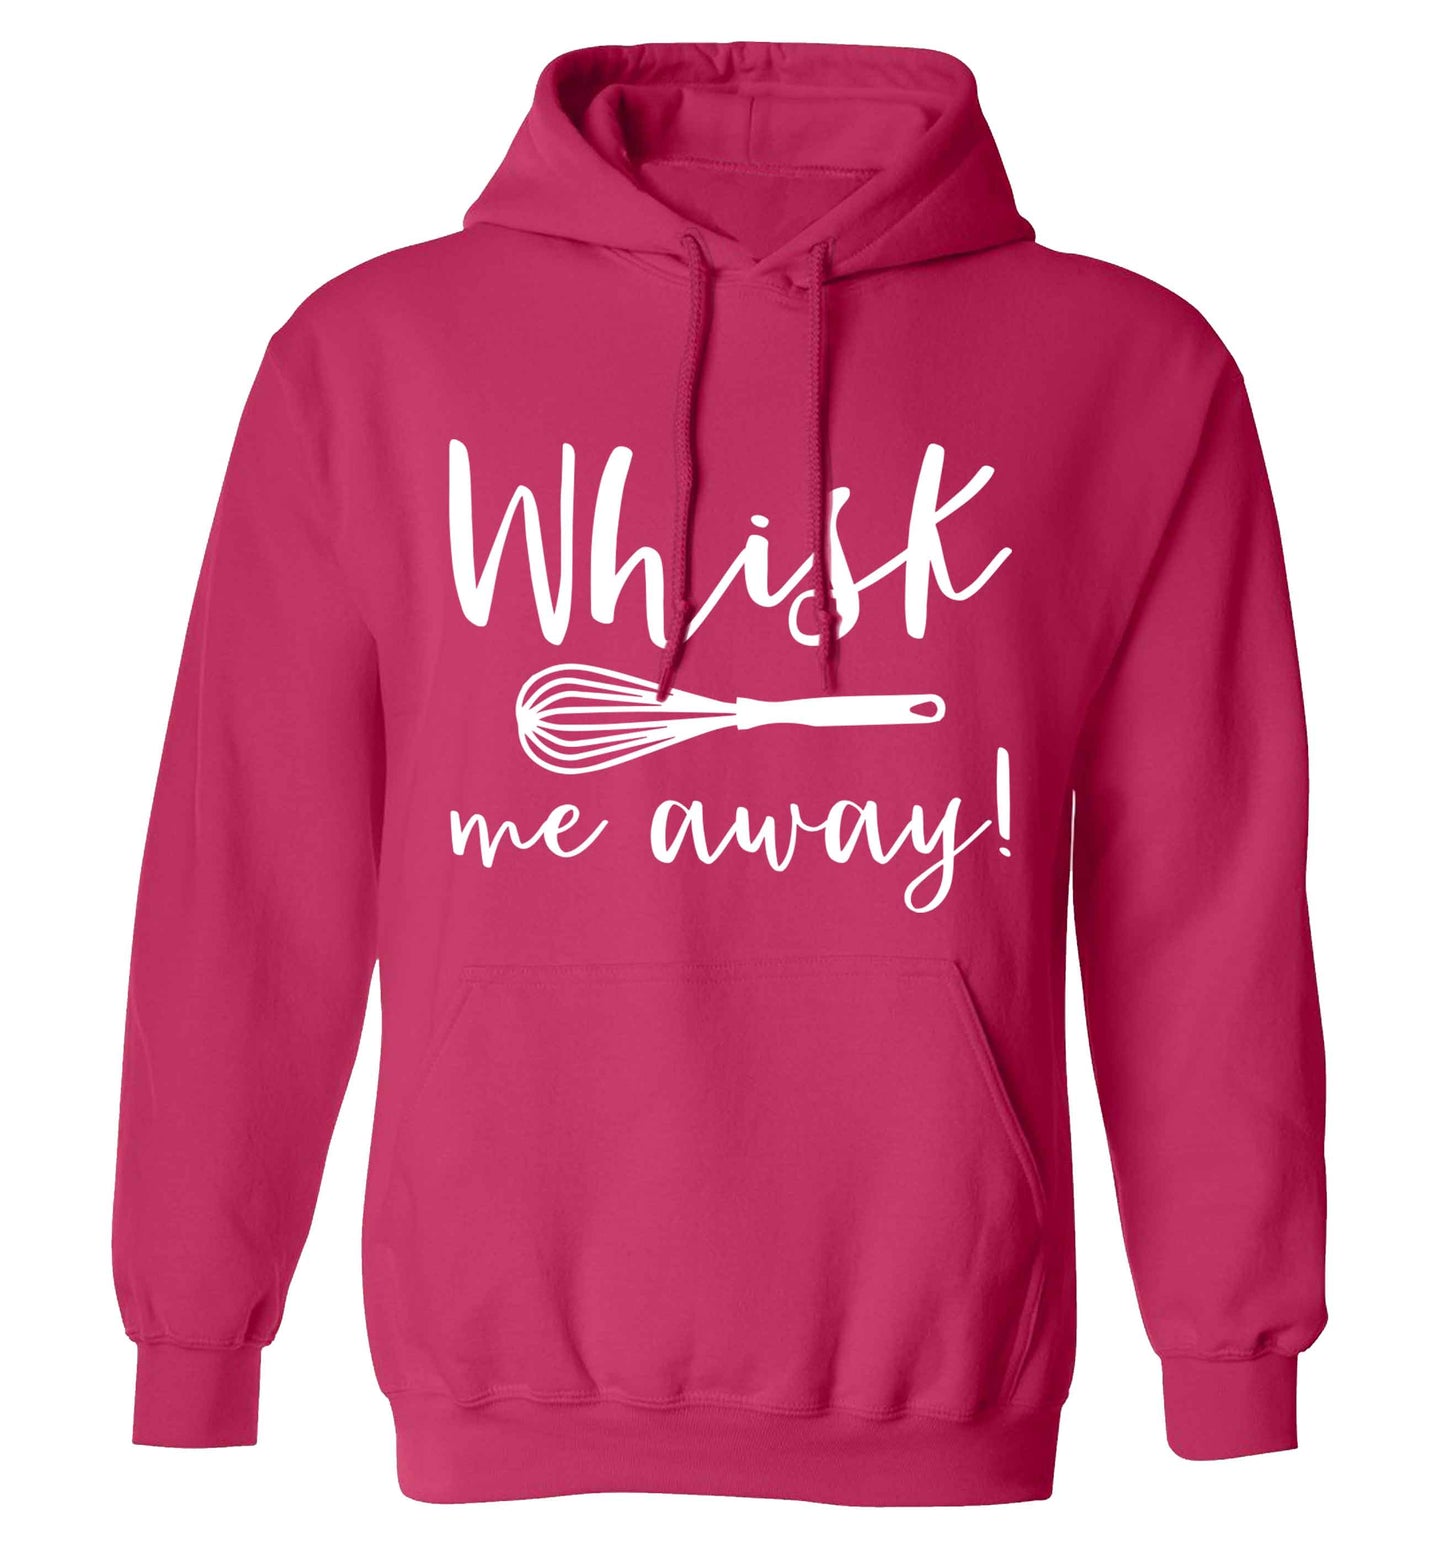 Whisk me away adults unisex pink hoodie 2XL